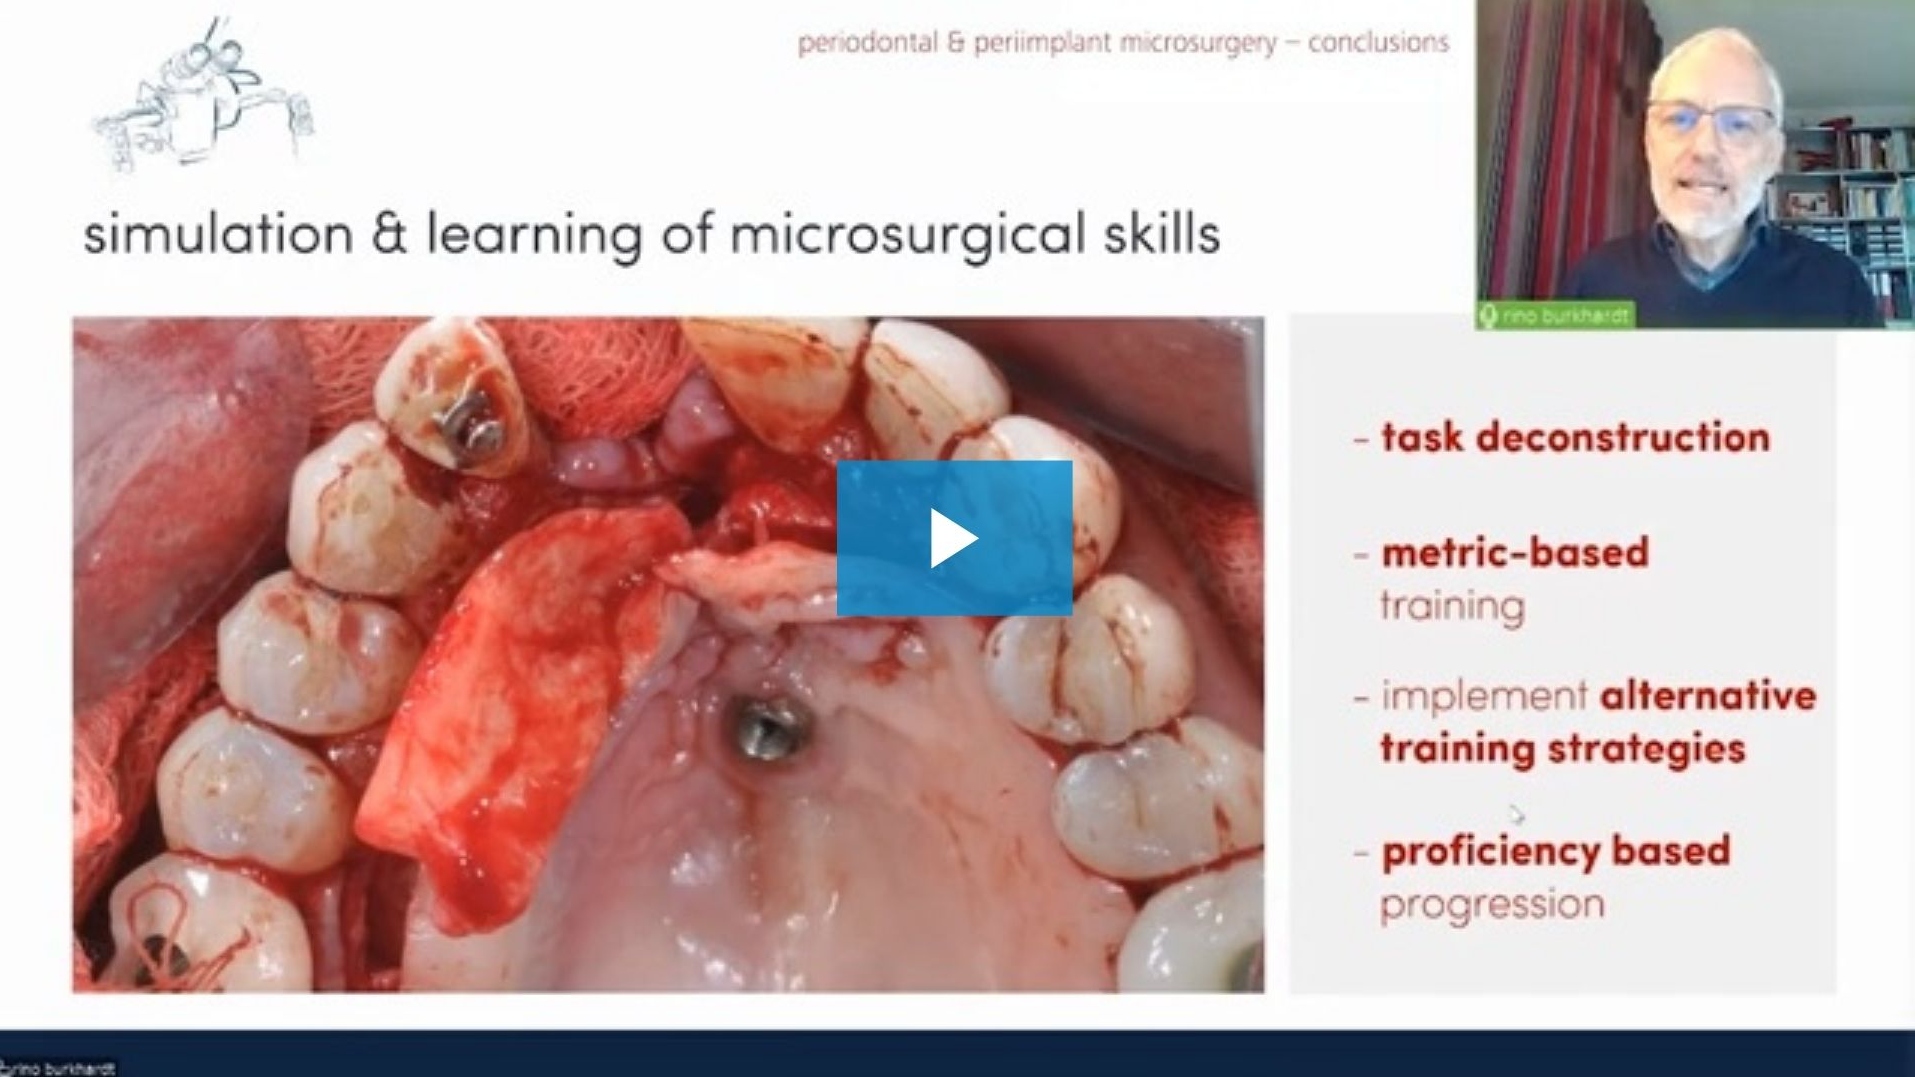 622-the-microsurgical-concept-in-periodontal-therapy-revisited_preview.jpg